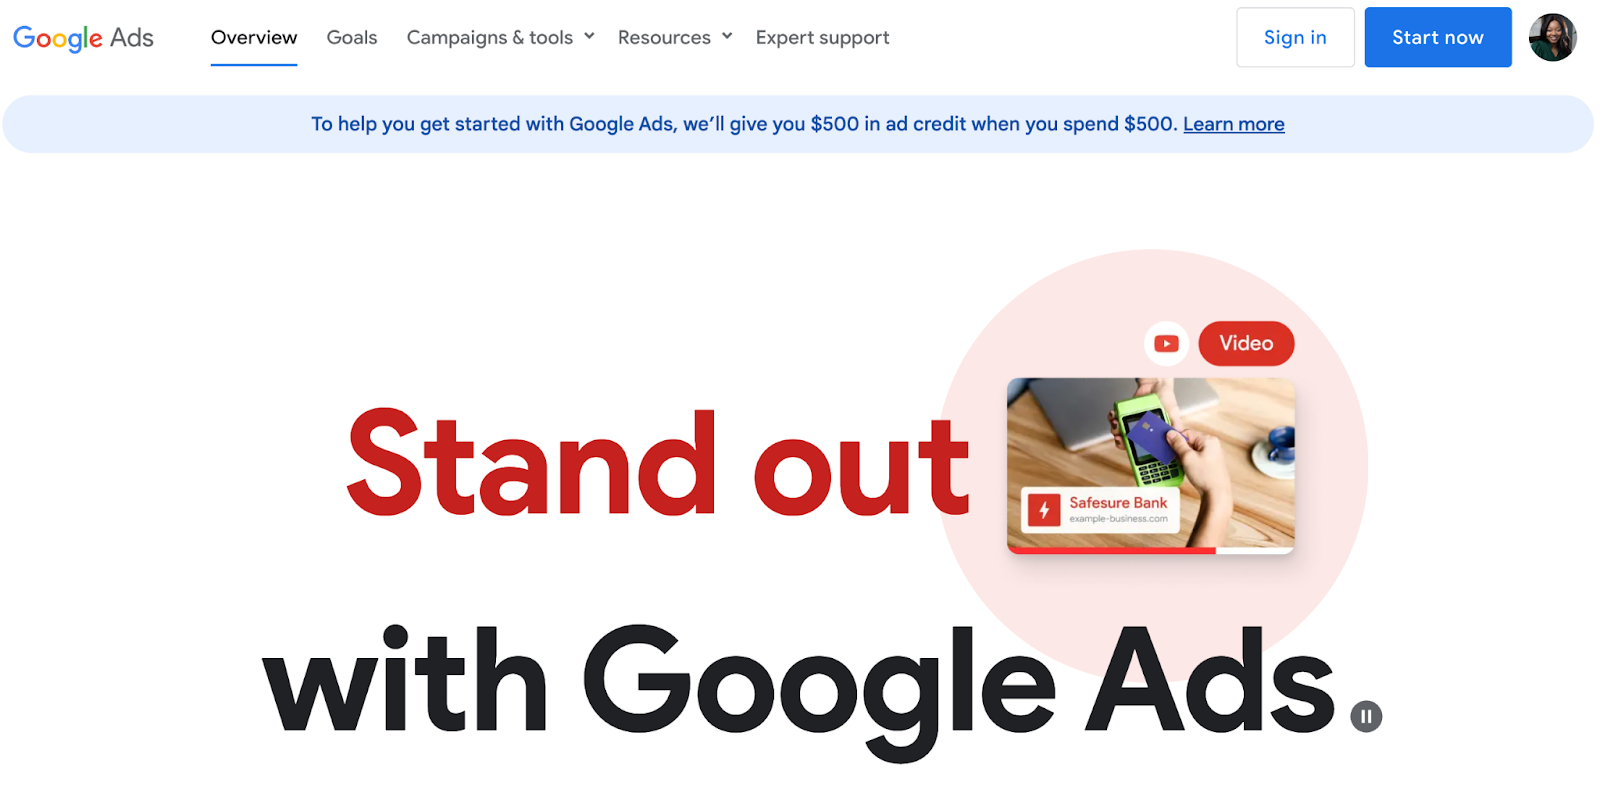 The Ultimate Guide to Google Ads [Examples]